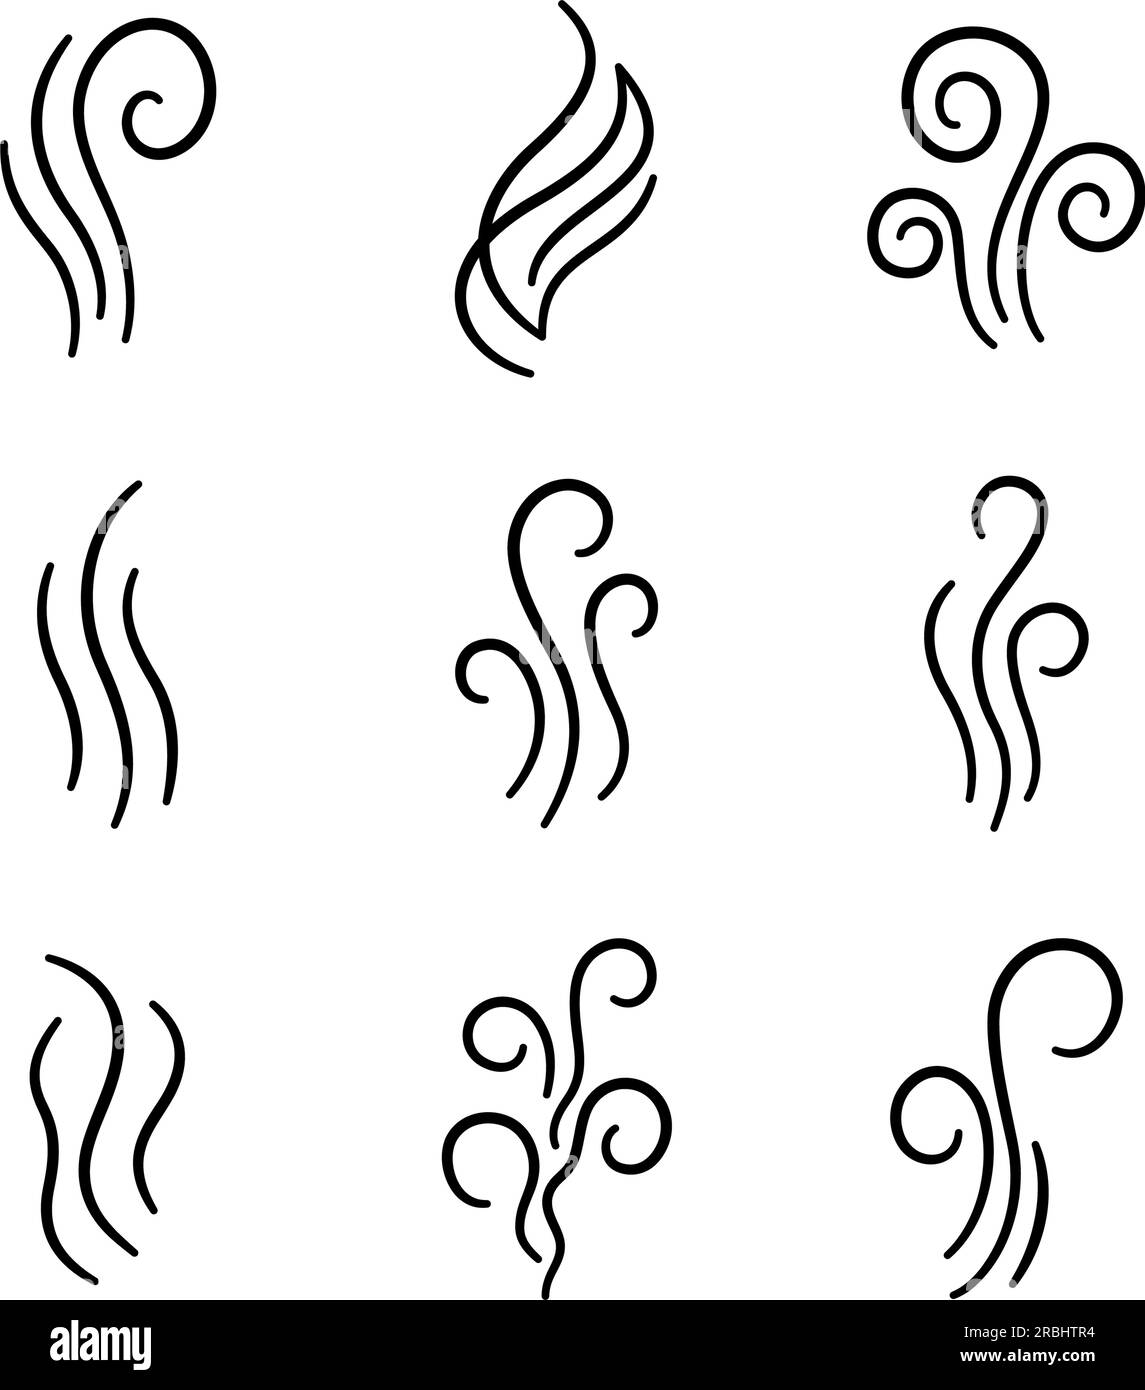 Doodle smoke icons set. Water steam symbols. Hand drawn hot vapors. Line air smell symbols. Doodle fire smoke icons. Vector illustration isolated on Stock Vector